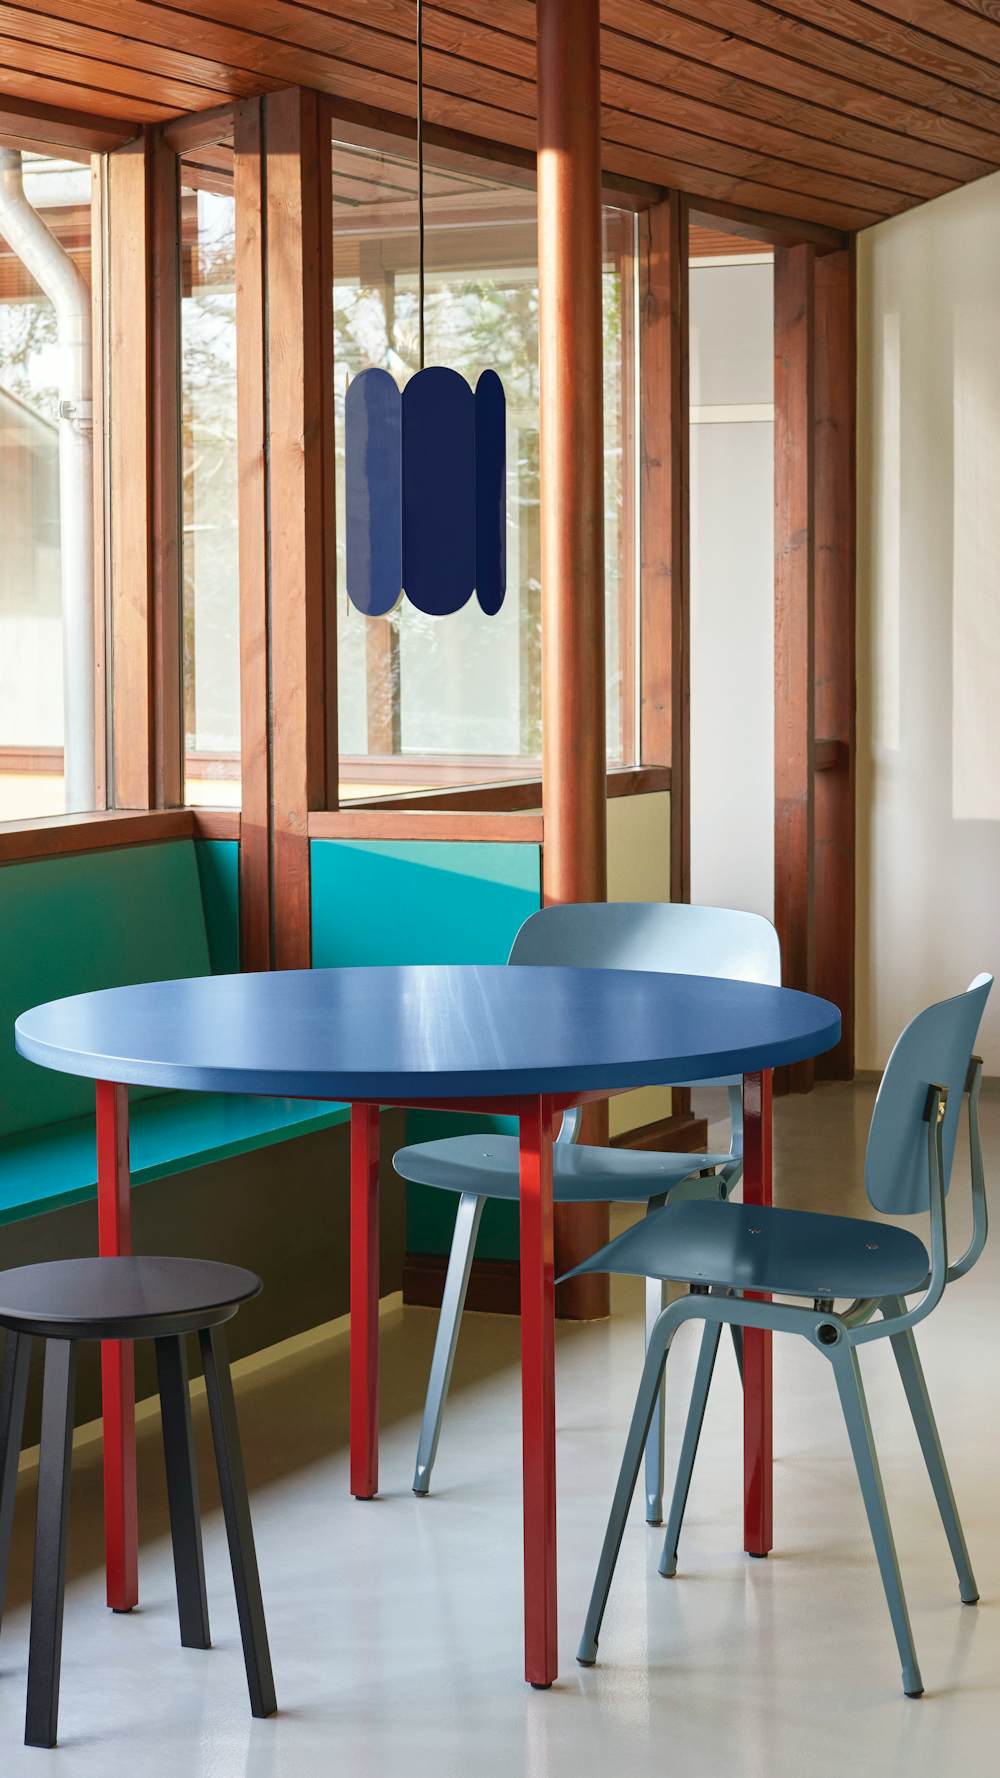 Two Colour Table and Result Chairs in a home dining nook setting